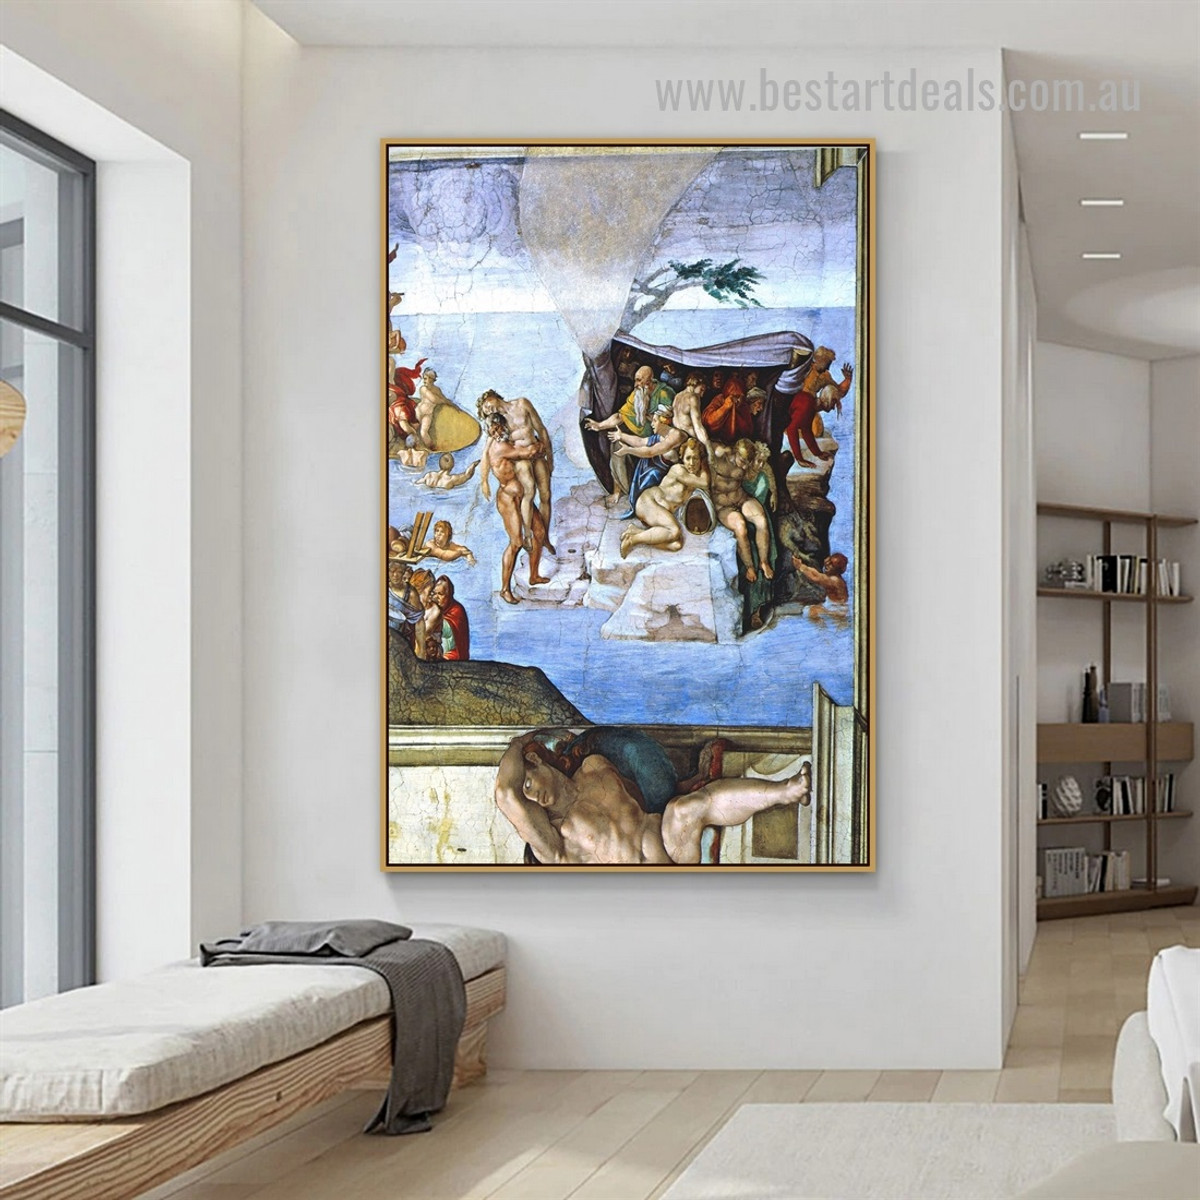 Sistine Chapel Ceiling the Flood Michelangelo High Renaissance Nude Figure Reproduction Artwork Picture Canvas Print for Room Wall Adornment